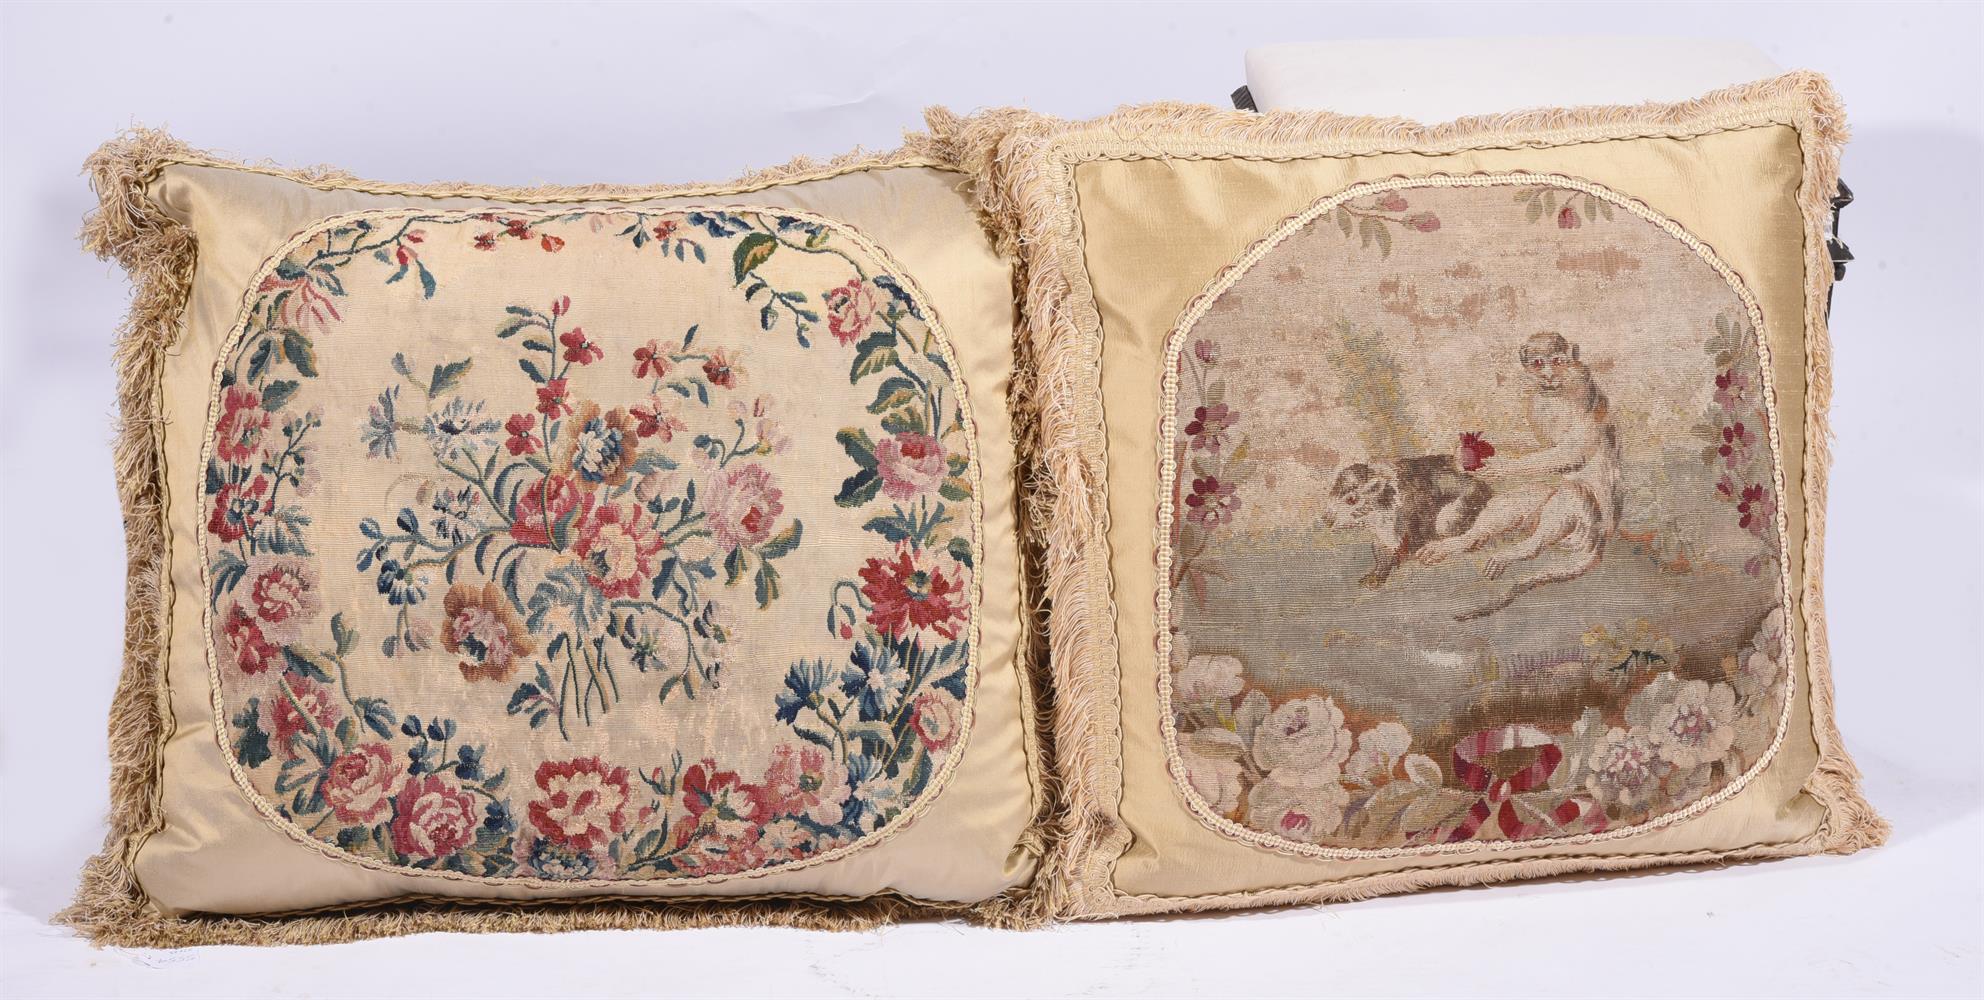 SIX LARGE CUSHIONS INCORPORATING 18TH CENTURY TAPESTRY AND LATER FABRIC - Image 4 of 4